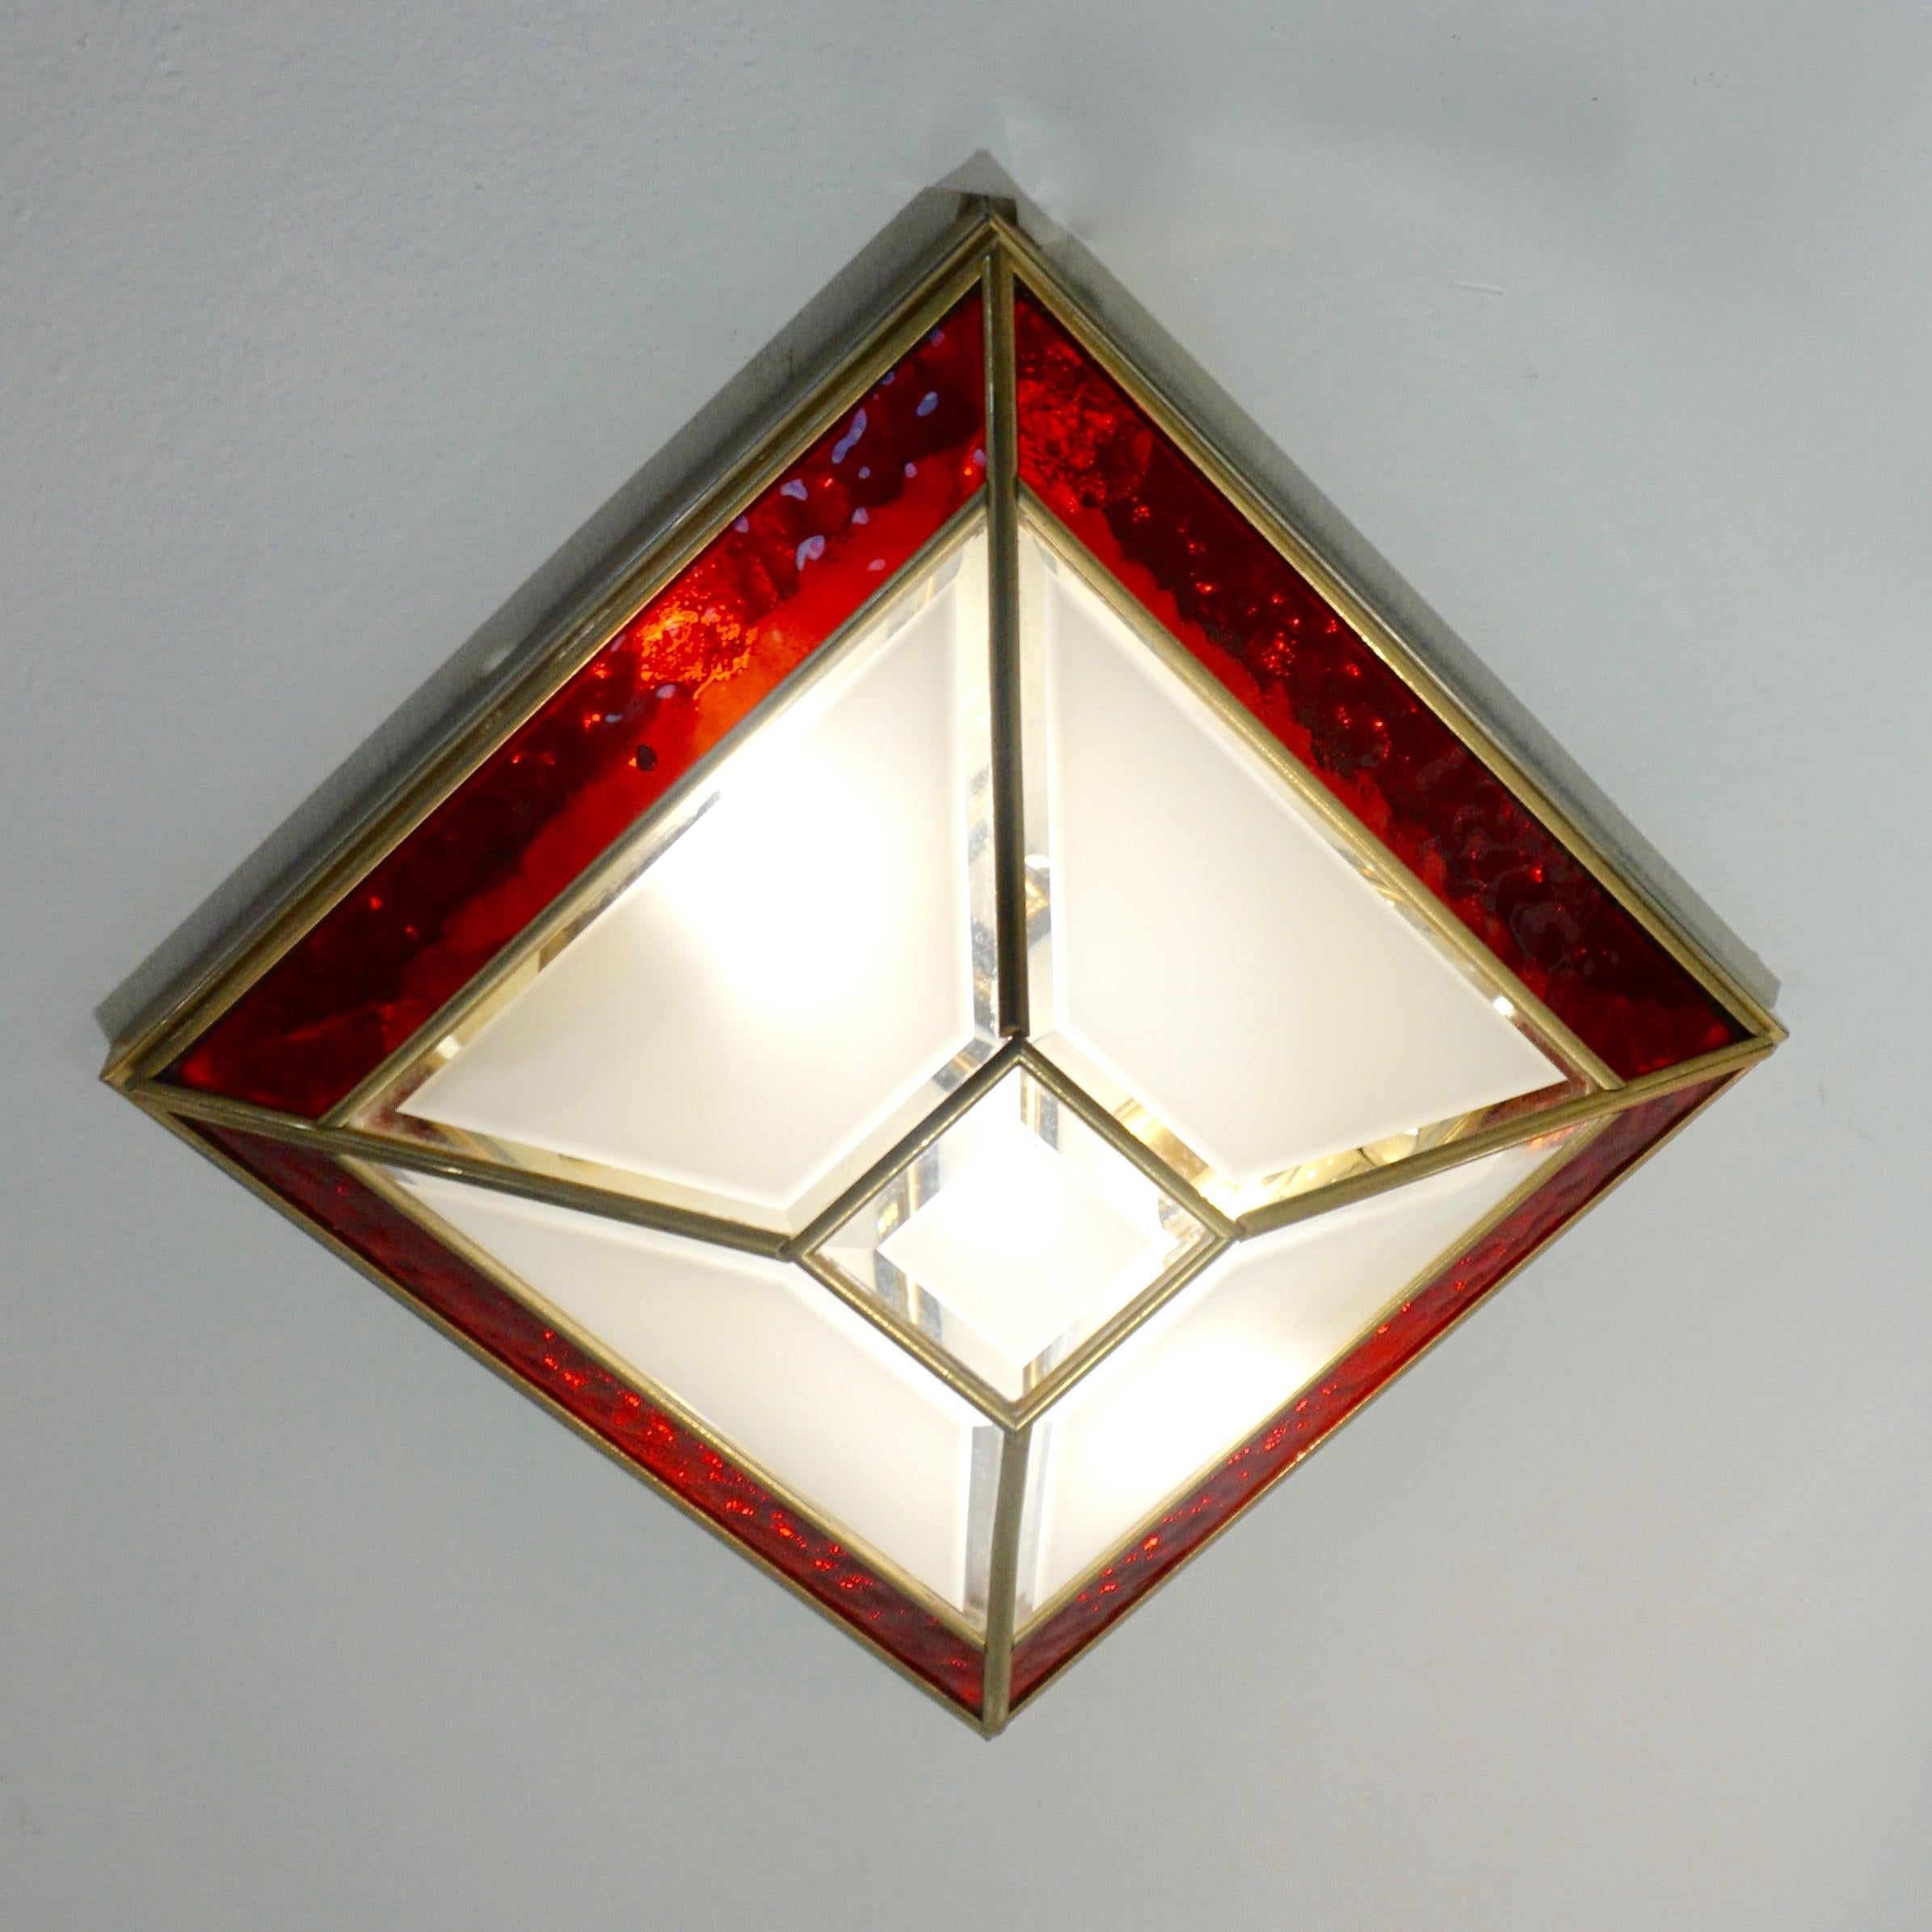 Italian 1950s Art Deco Style Pair of Red White Frosted Glass Sconces/Flushmounts 12